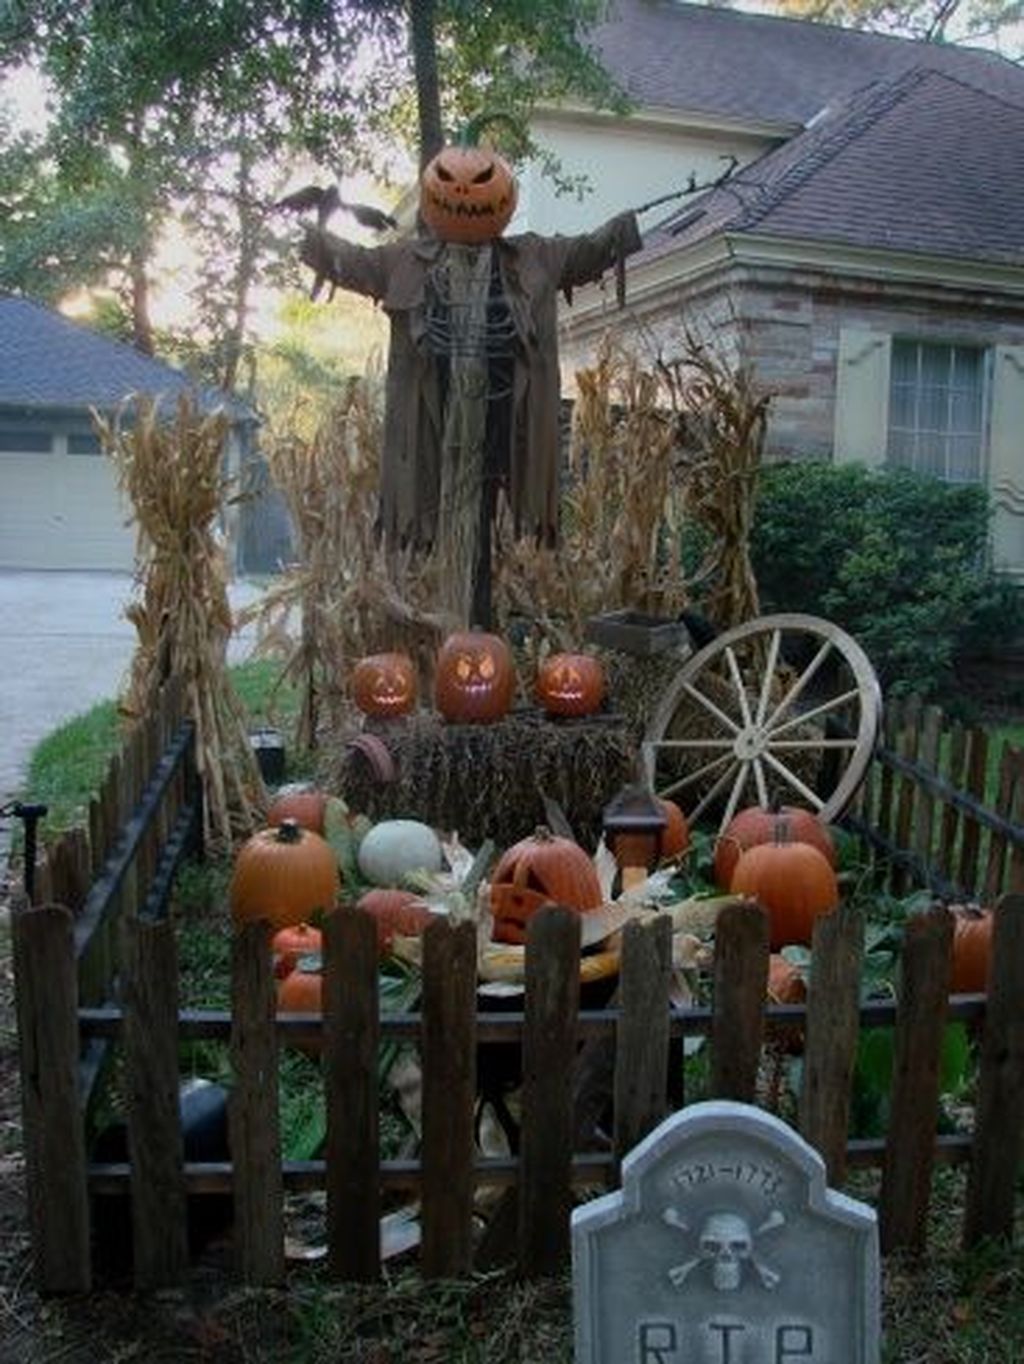 31 Awesome Halloween Backyard Party Decorations Ideas - Awesome Halloween BackyarD Party Decorations IDeas 12